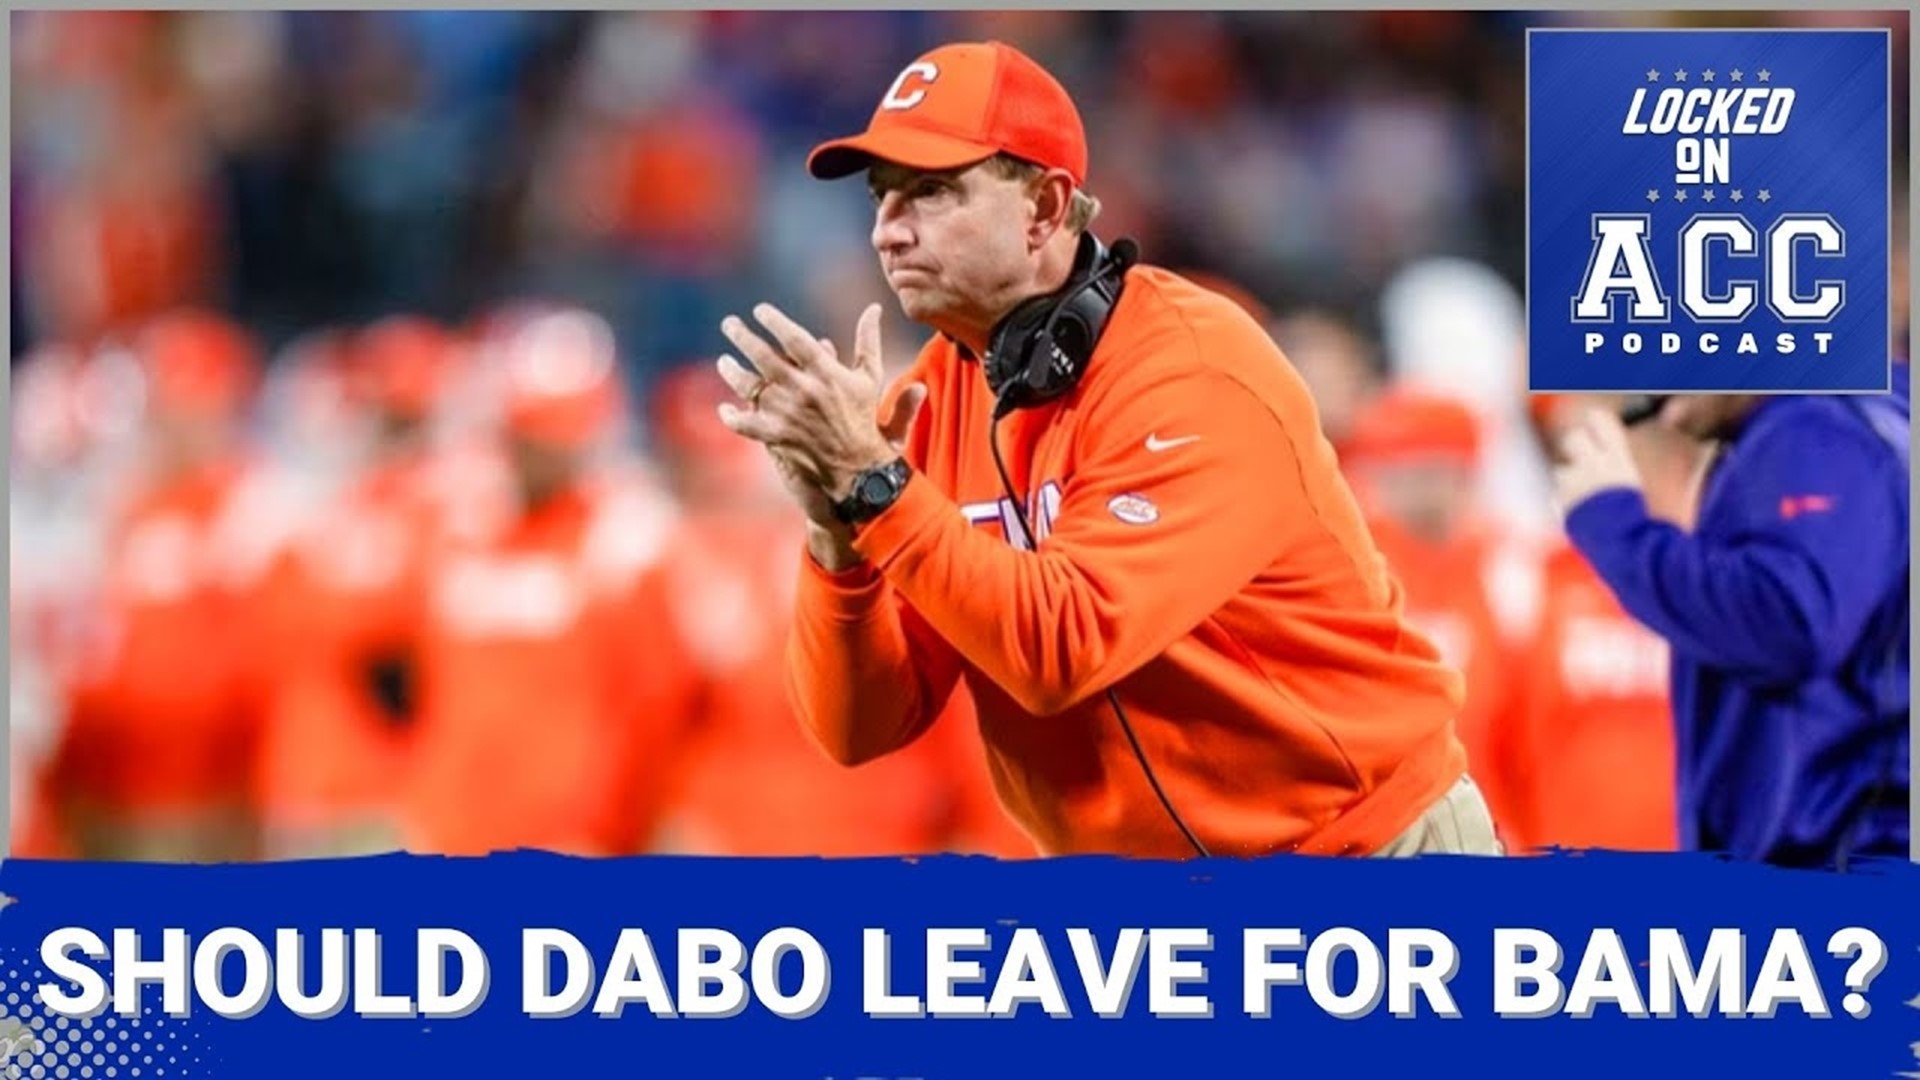 Nick Saban is done at Alabama, could Dabo Swinney leave Clemson to replace him?